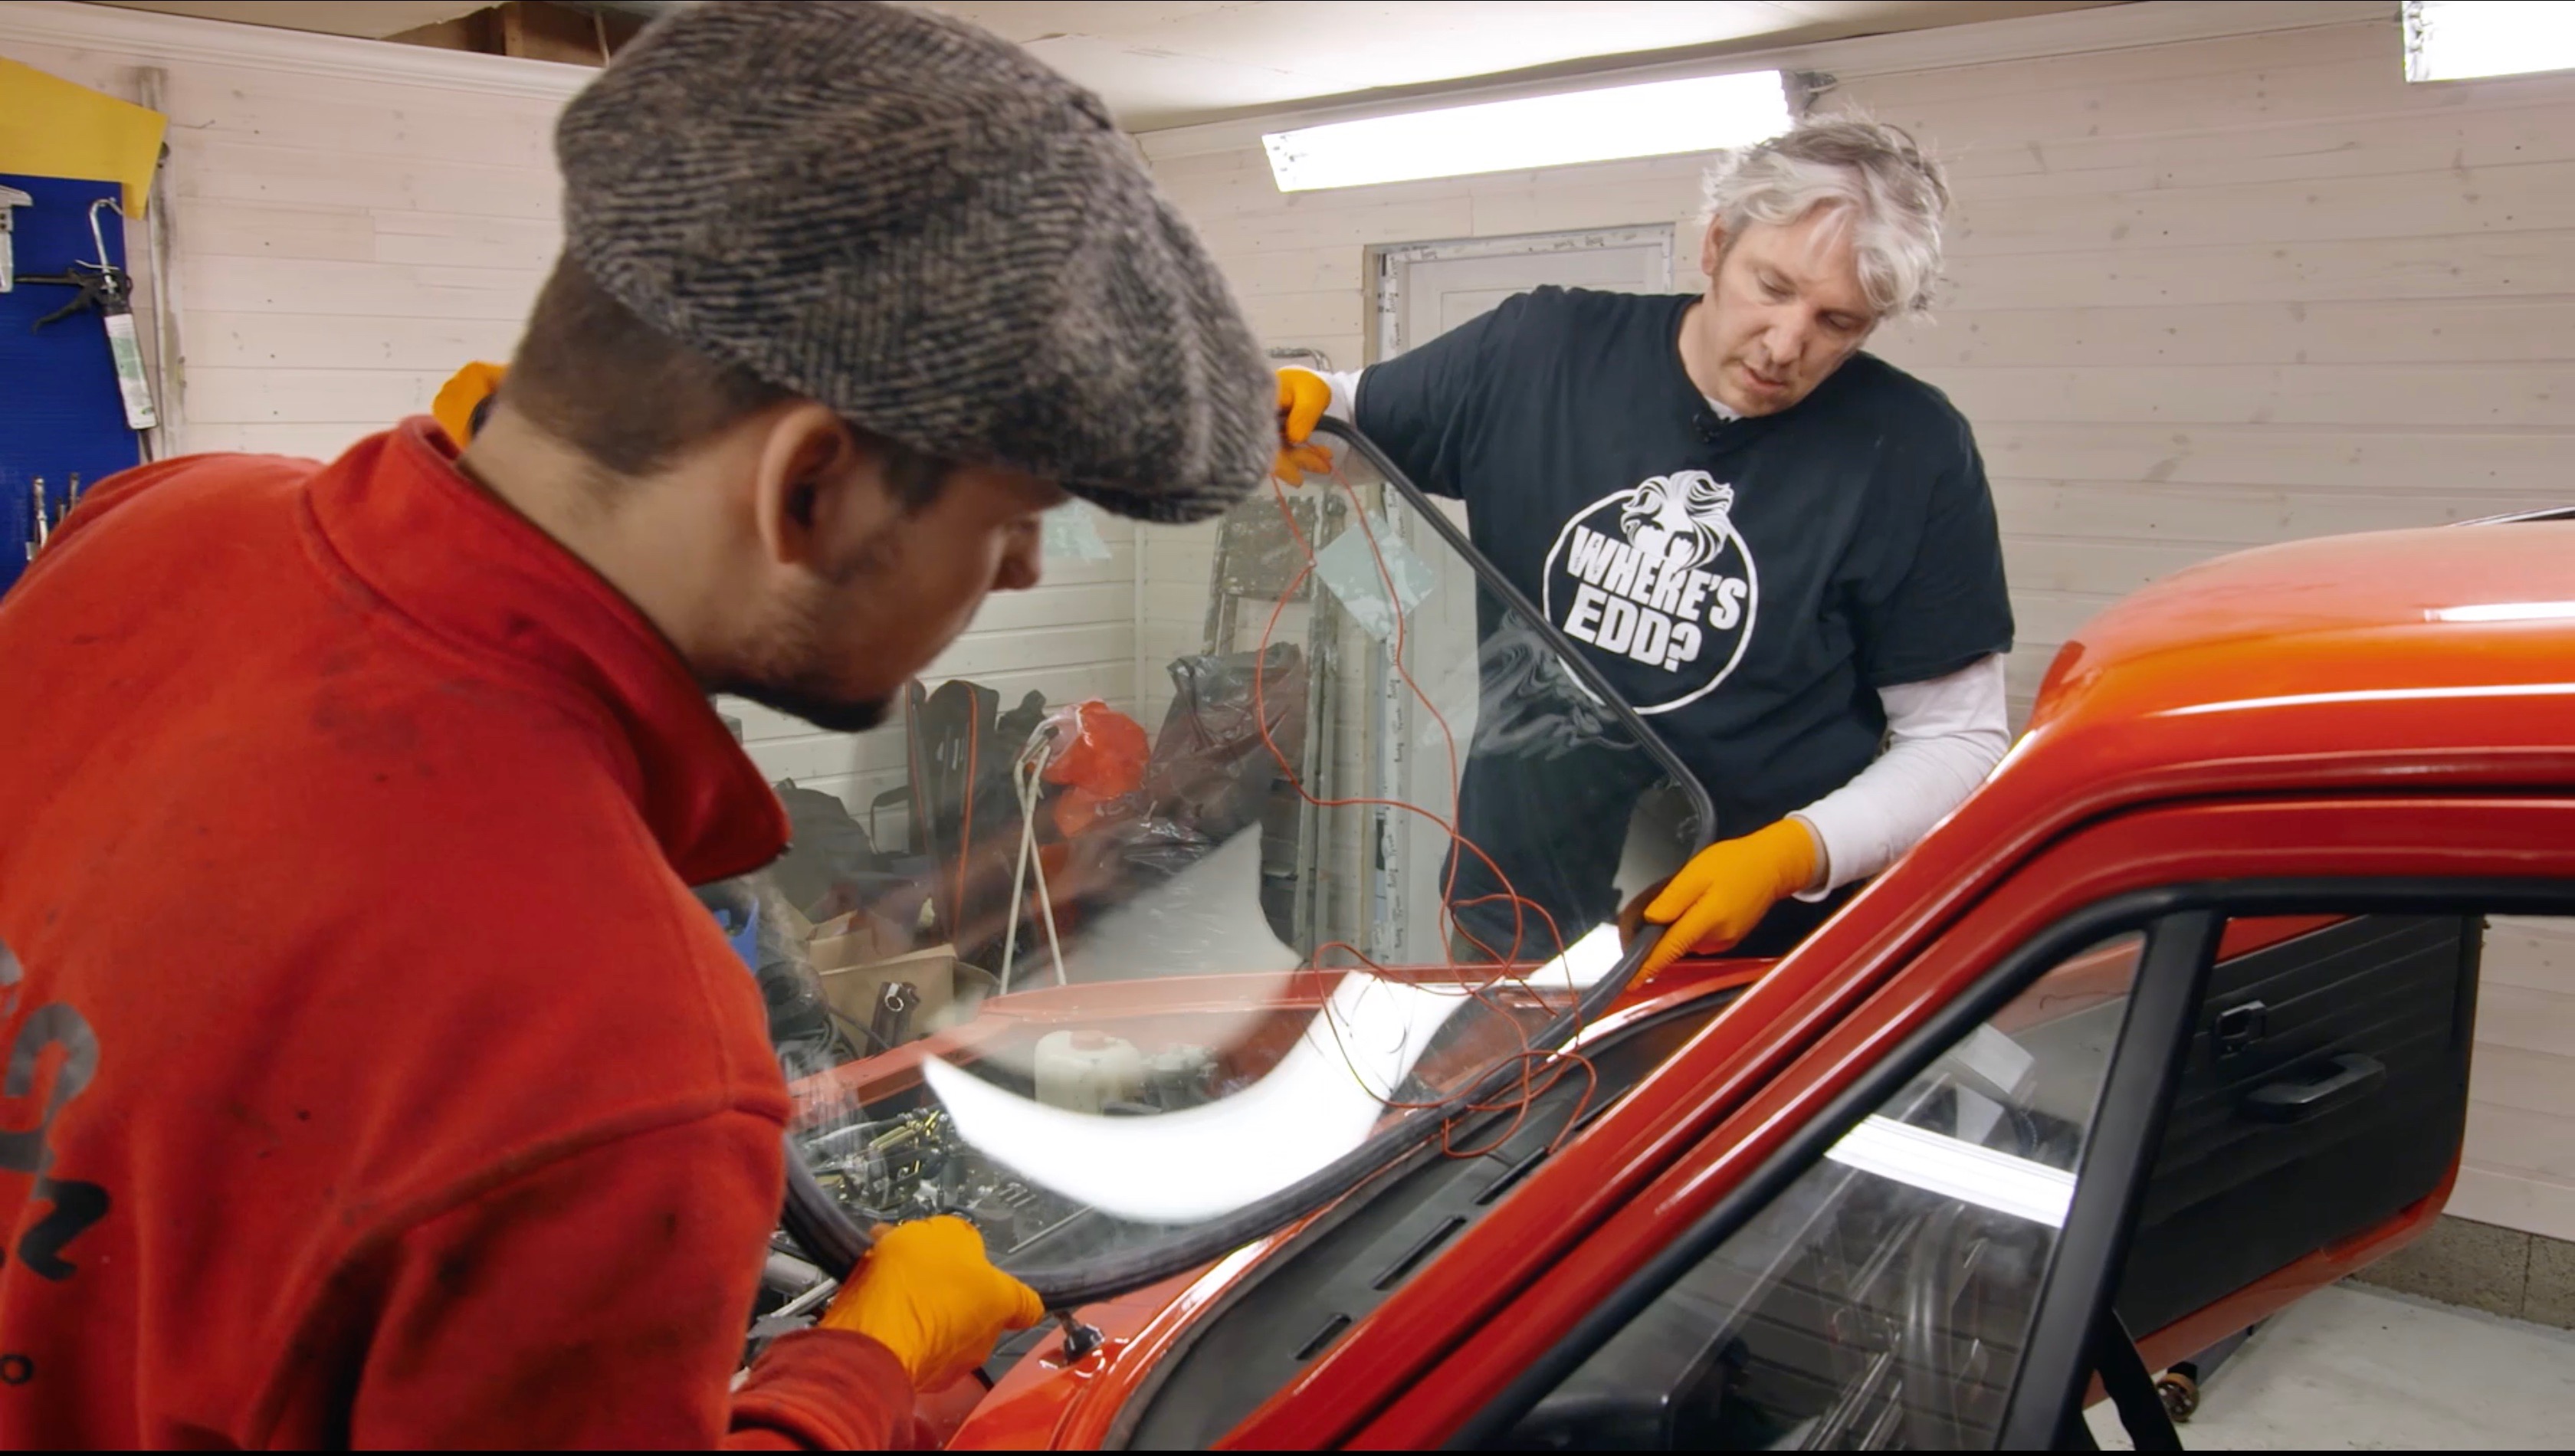 Edd China, The revival of a car, and of Edd China, ClassicCars.com Journal